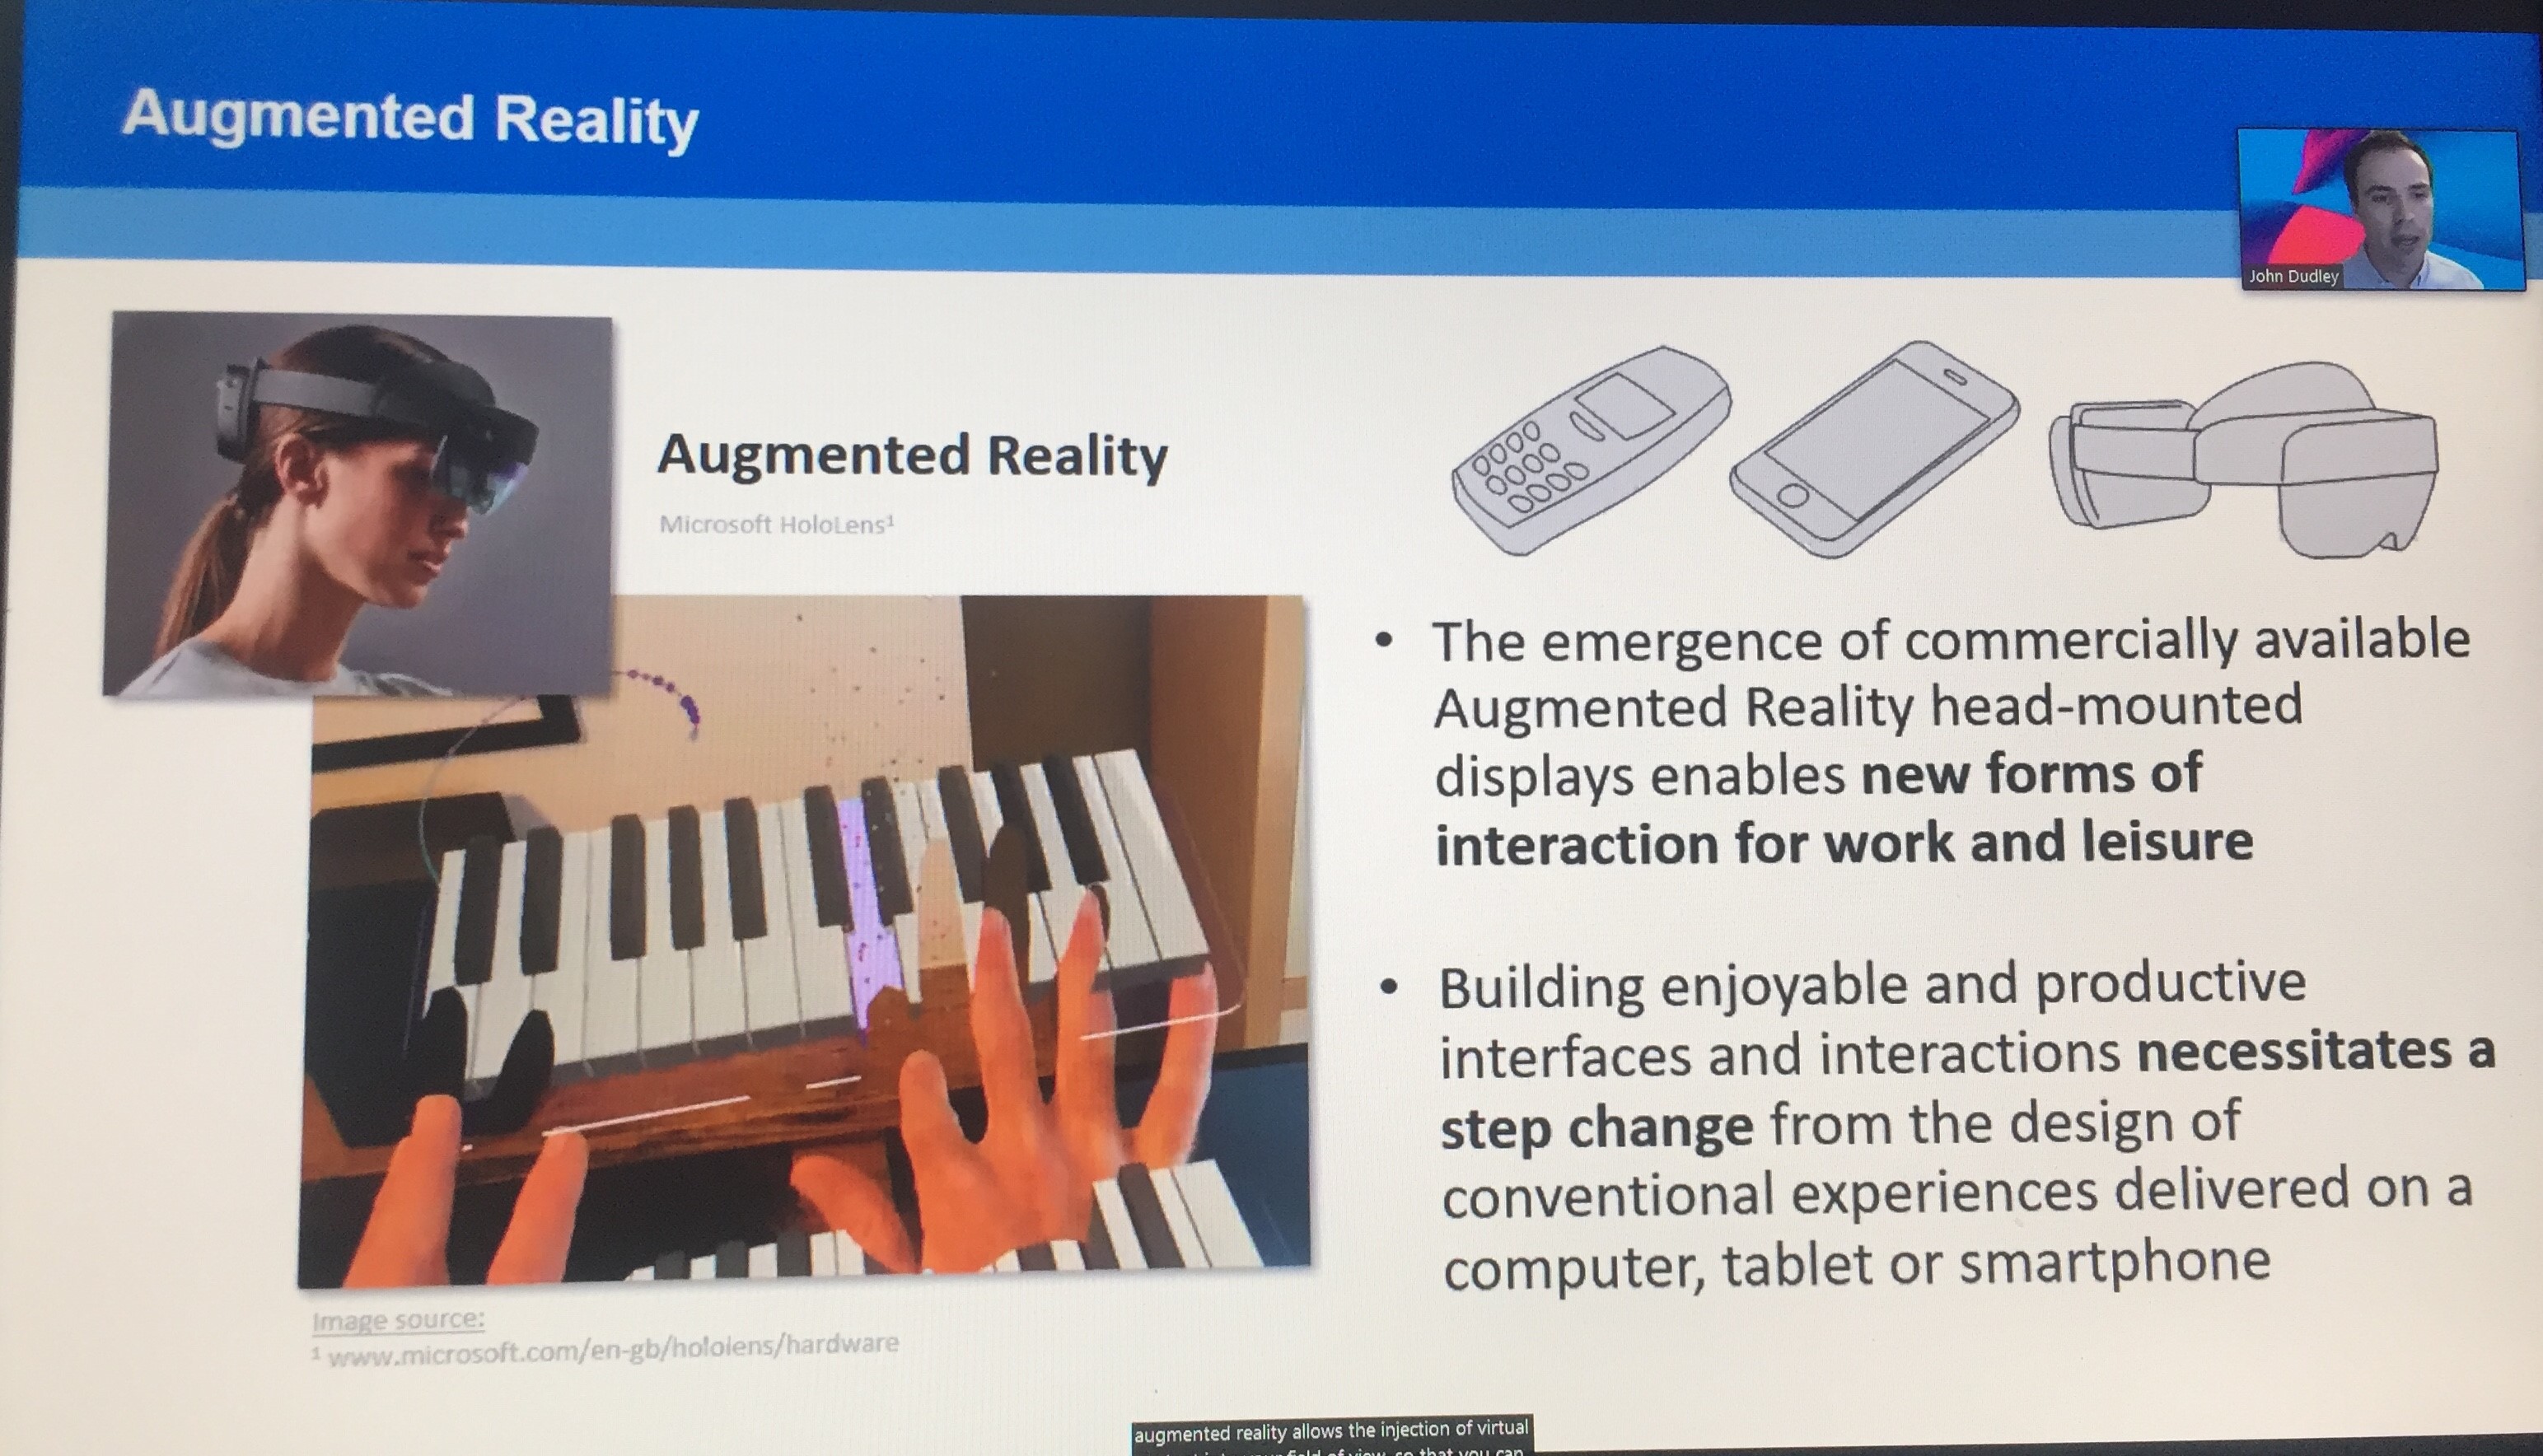 A slide about augmented reality from John Dudley's presentation. 